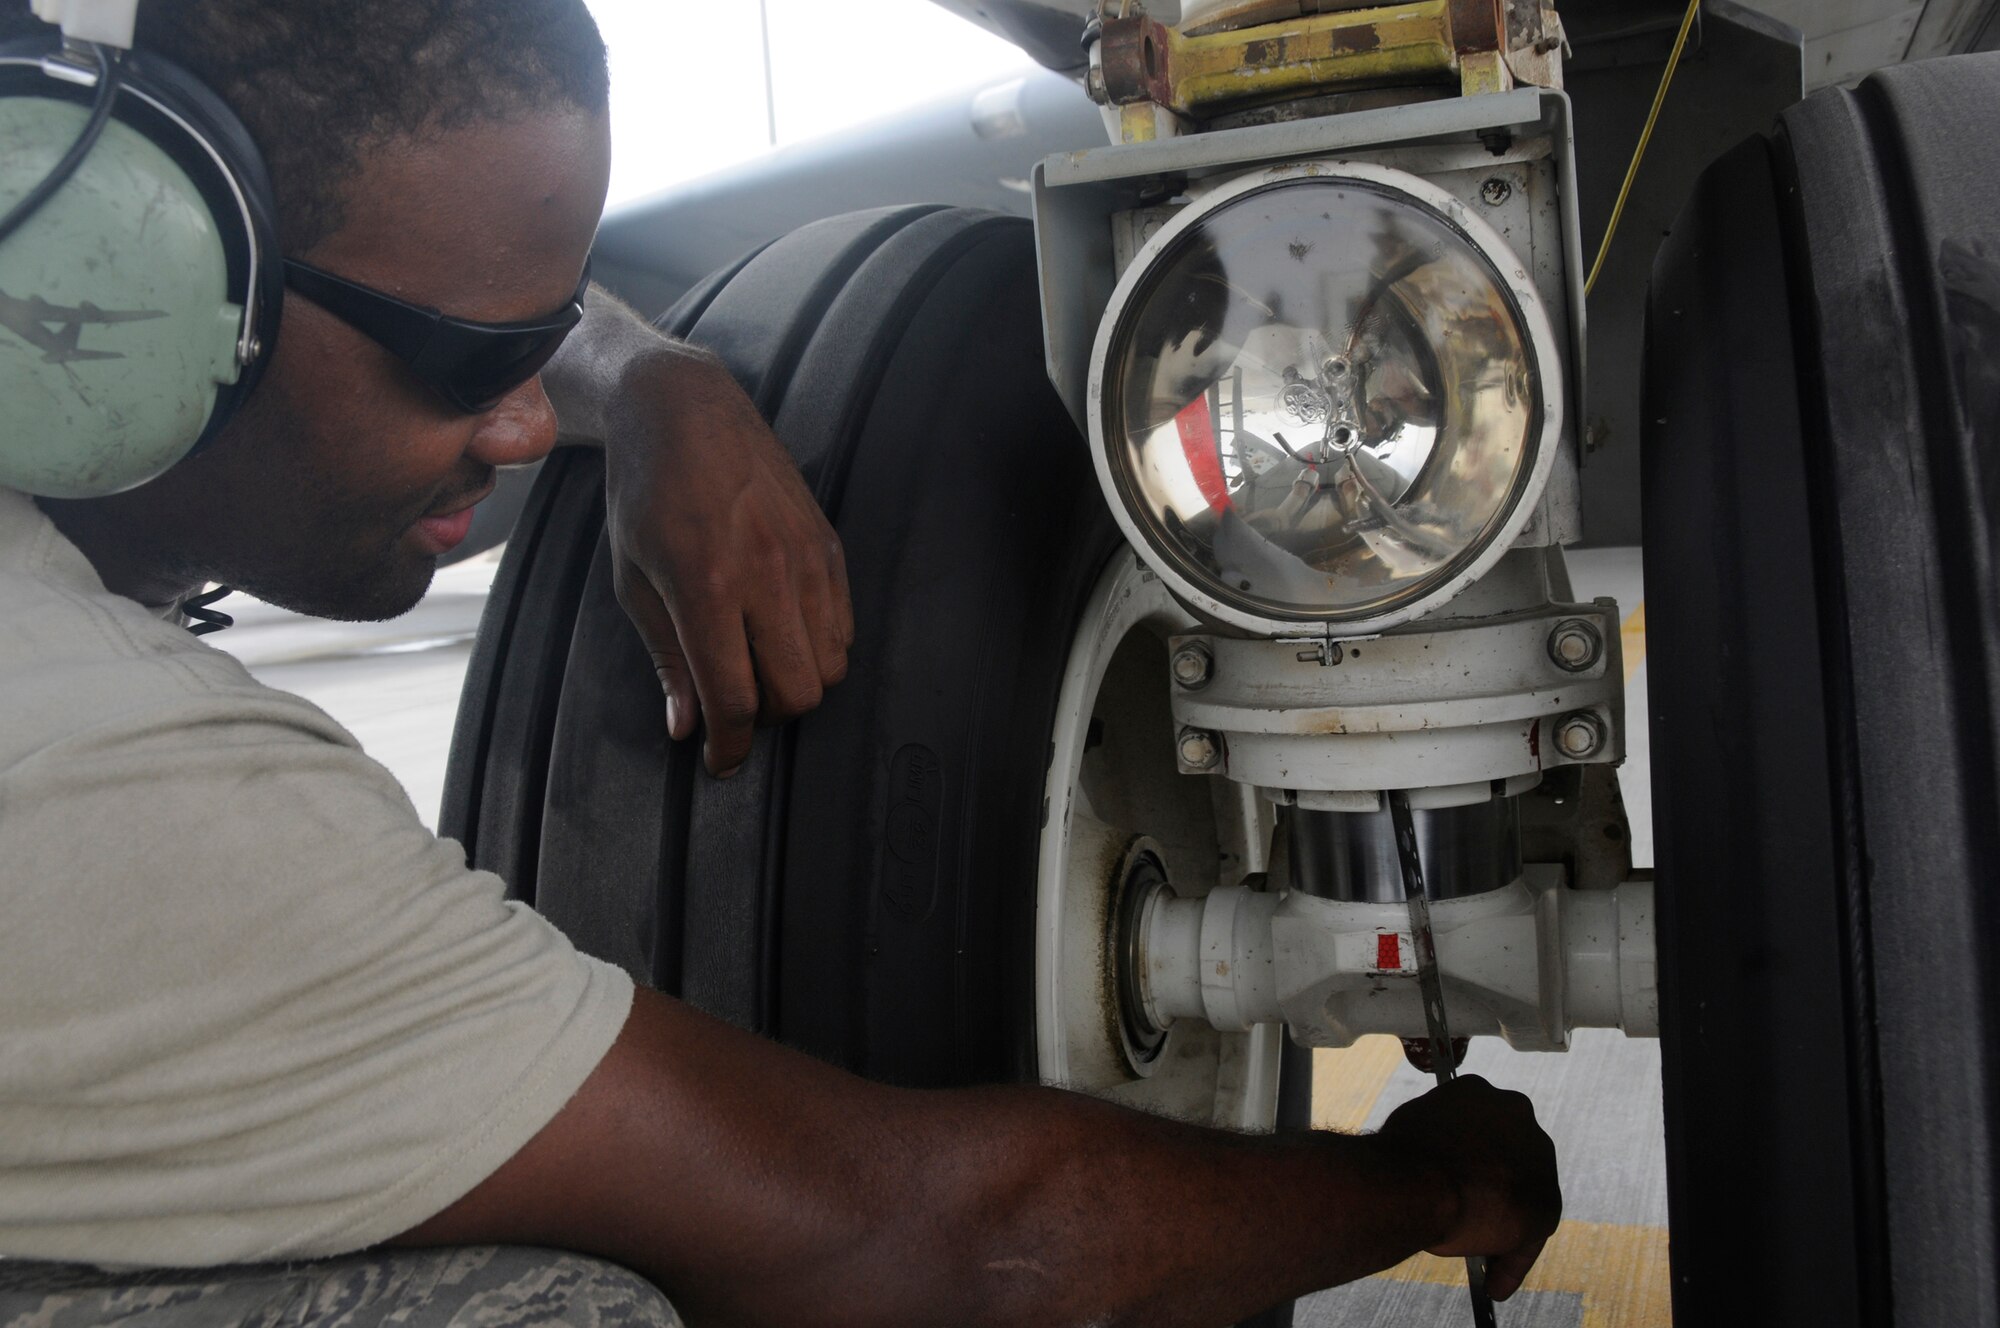 Airman 1st Class Jermie Hunt, crew chief assigned to the 379th Expeditionary Aircraft Maintenance Squadron, measures the nose strut of a KC-135 Stratotanker to ensure it is extended the proper length relative to the aircraft's weight Nov. 3, at an undisclosed air base in Southwest Asia.  379th EMXS crew chiefs are responsible for recovering aircraft after missions and ensuring they are prepared for their next launch supporting Operations Iraqi and Enduring Freedom and Joint Task Force-Horn of Africa. Airman Hunt, a native of Dallas, Texas, is deployed from Grand Forks Air Force Base, N.D.  (U.S. Air Force photo by Staff Sgt. Darnell T. Cannady/Released)